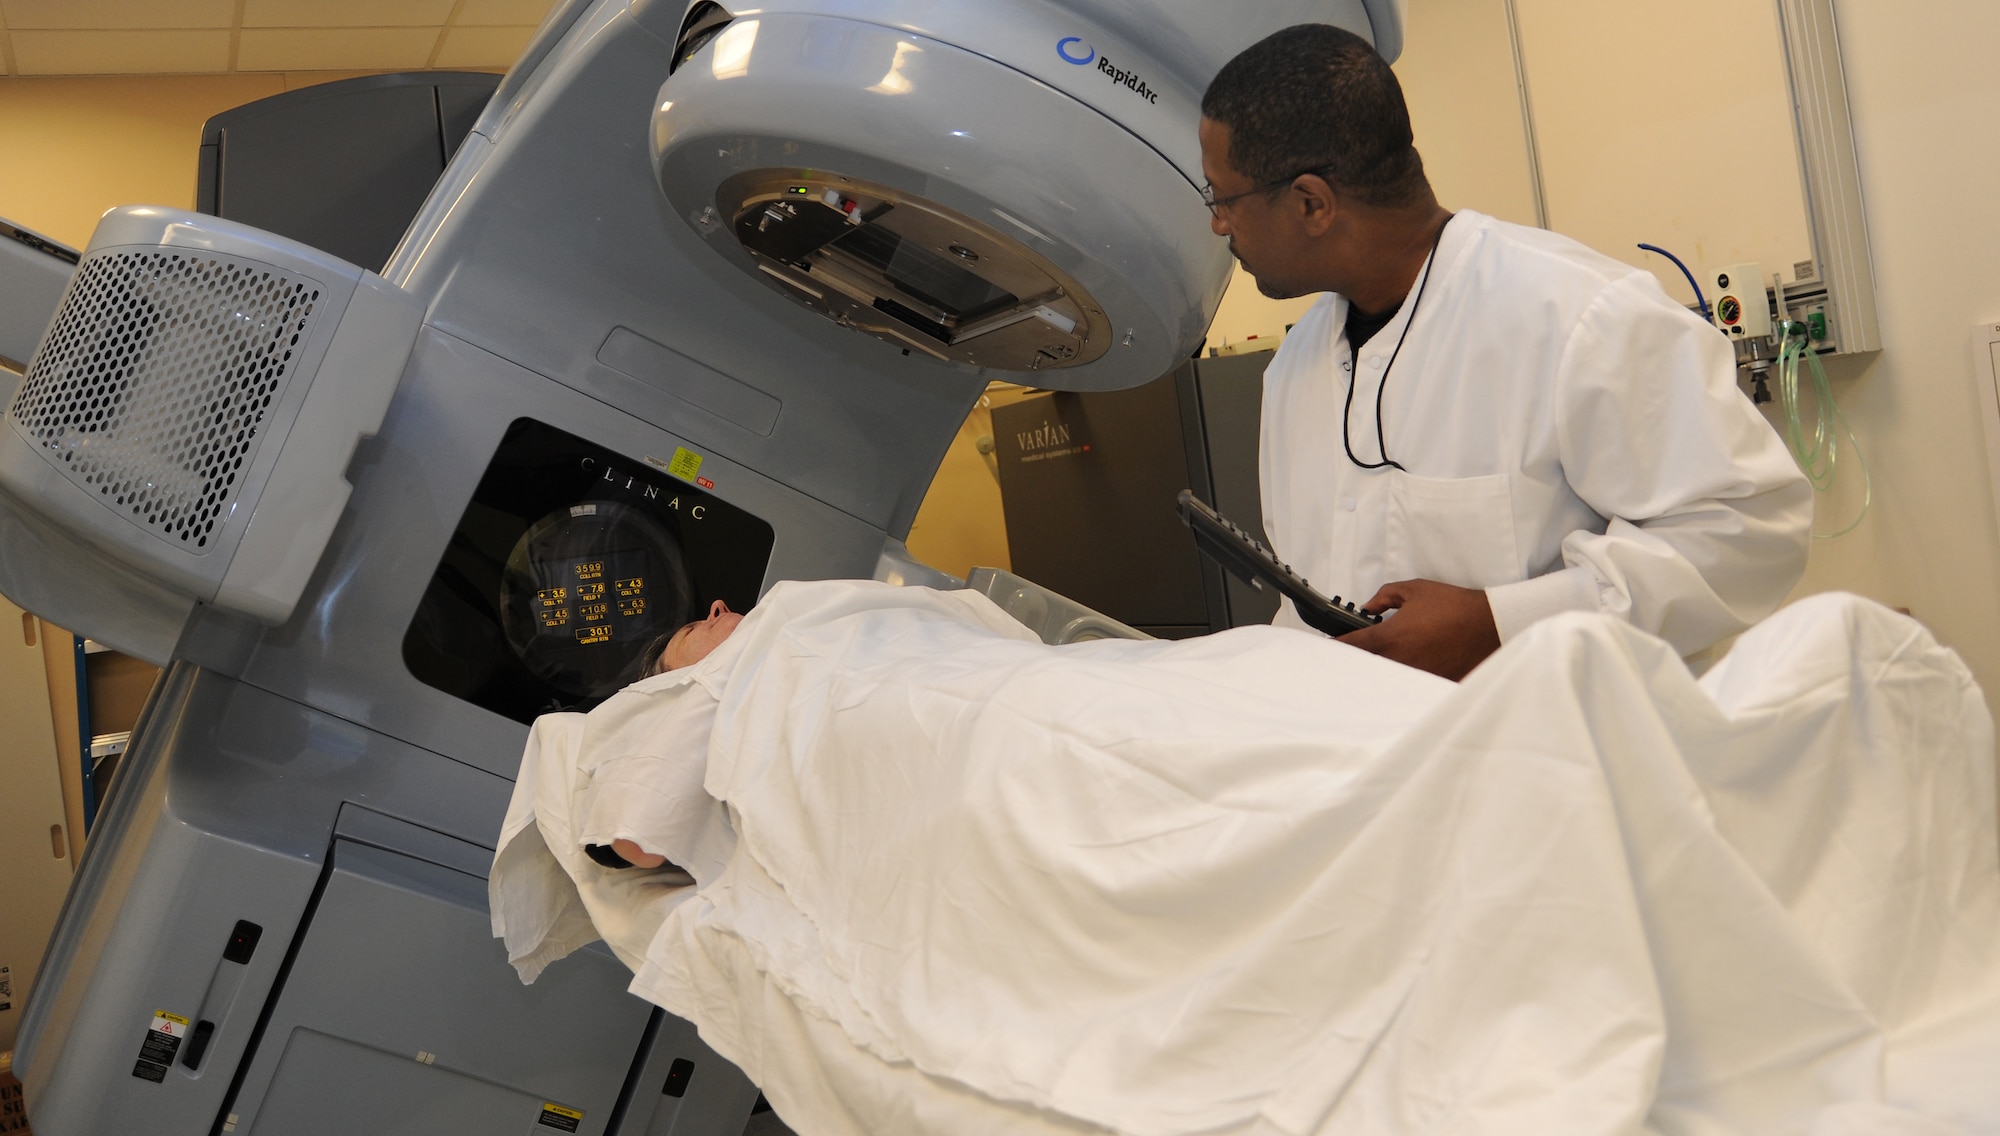 Radiation therapist Rudie Collins demonstrates the position of a patient before beginning a treatment session, Jan. 31, at David Grant USAF Medical Center radiation therapy clinic. (U.S. Air Force photo/ Staff Sgt. Liliana Moreno)